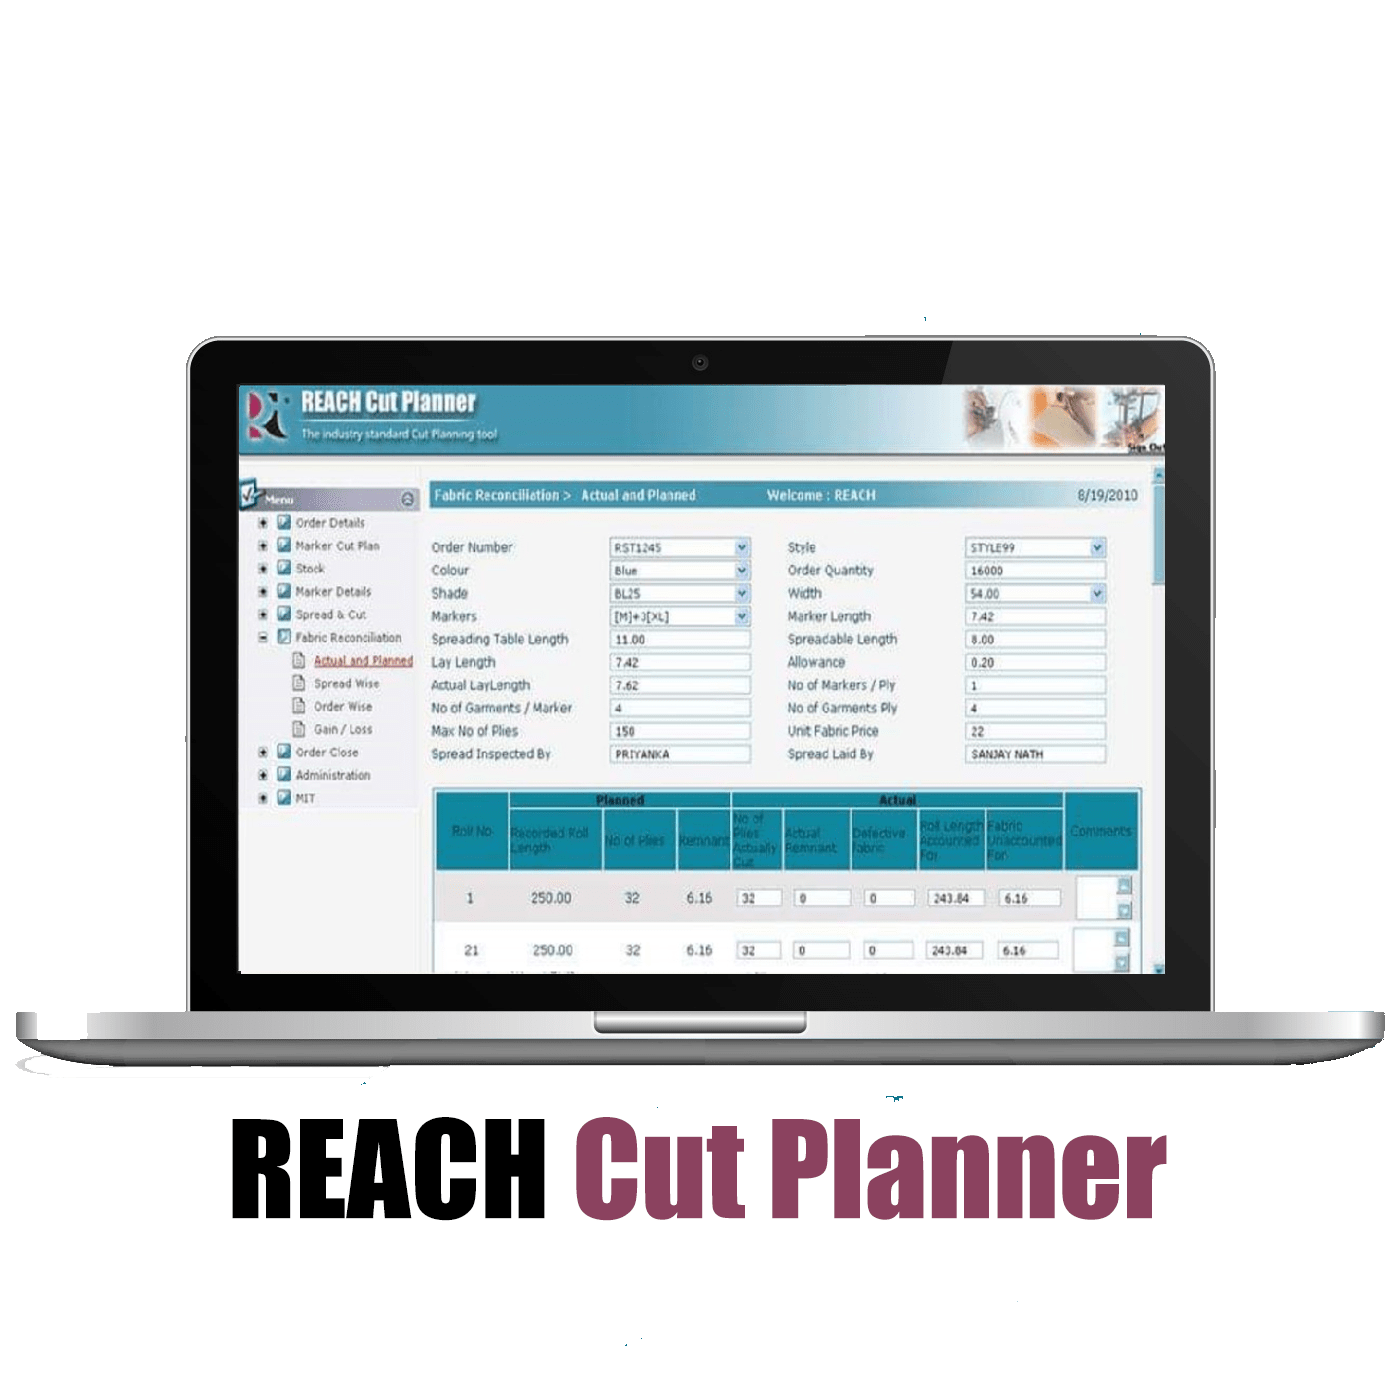 apparel lay planning software